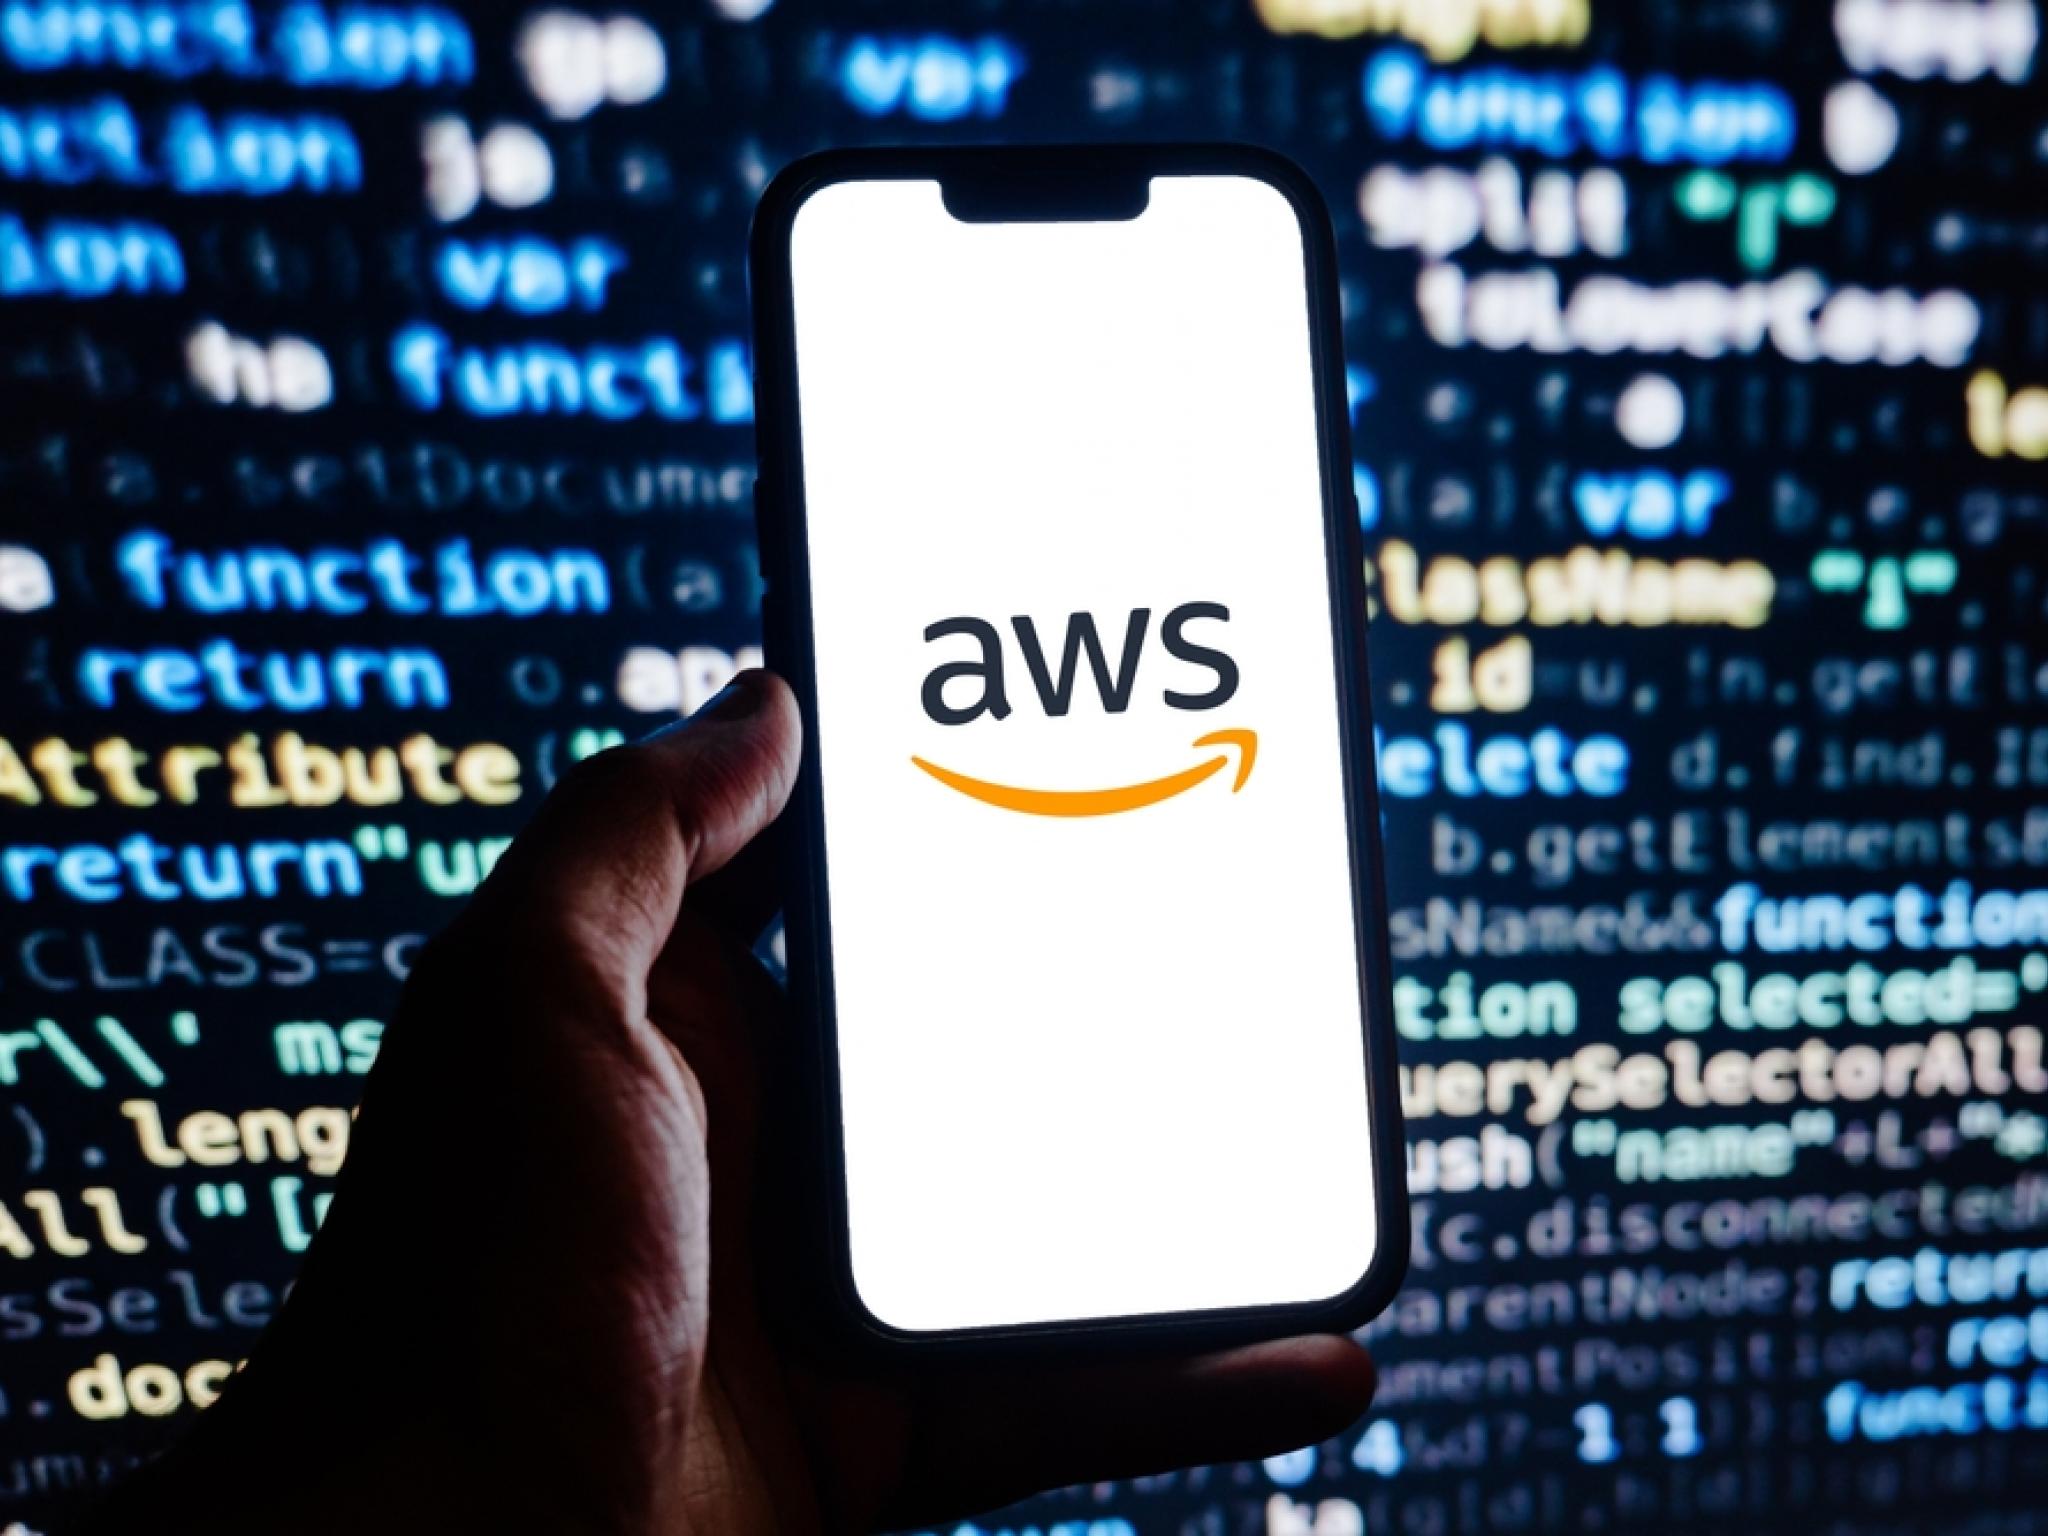  amazons-aws-in-talks-to-invest-billions-in-italian-data-center-expansion 